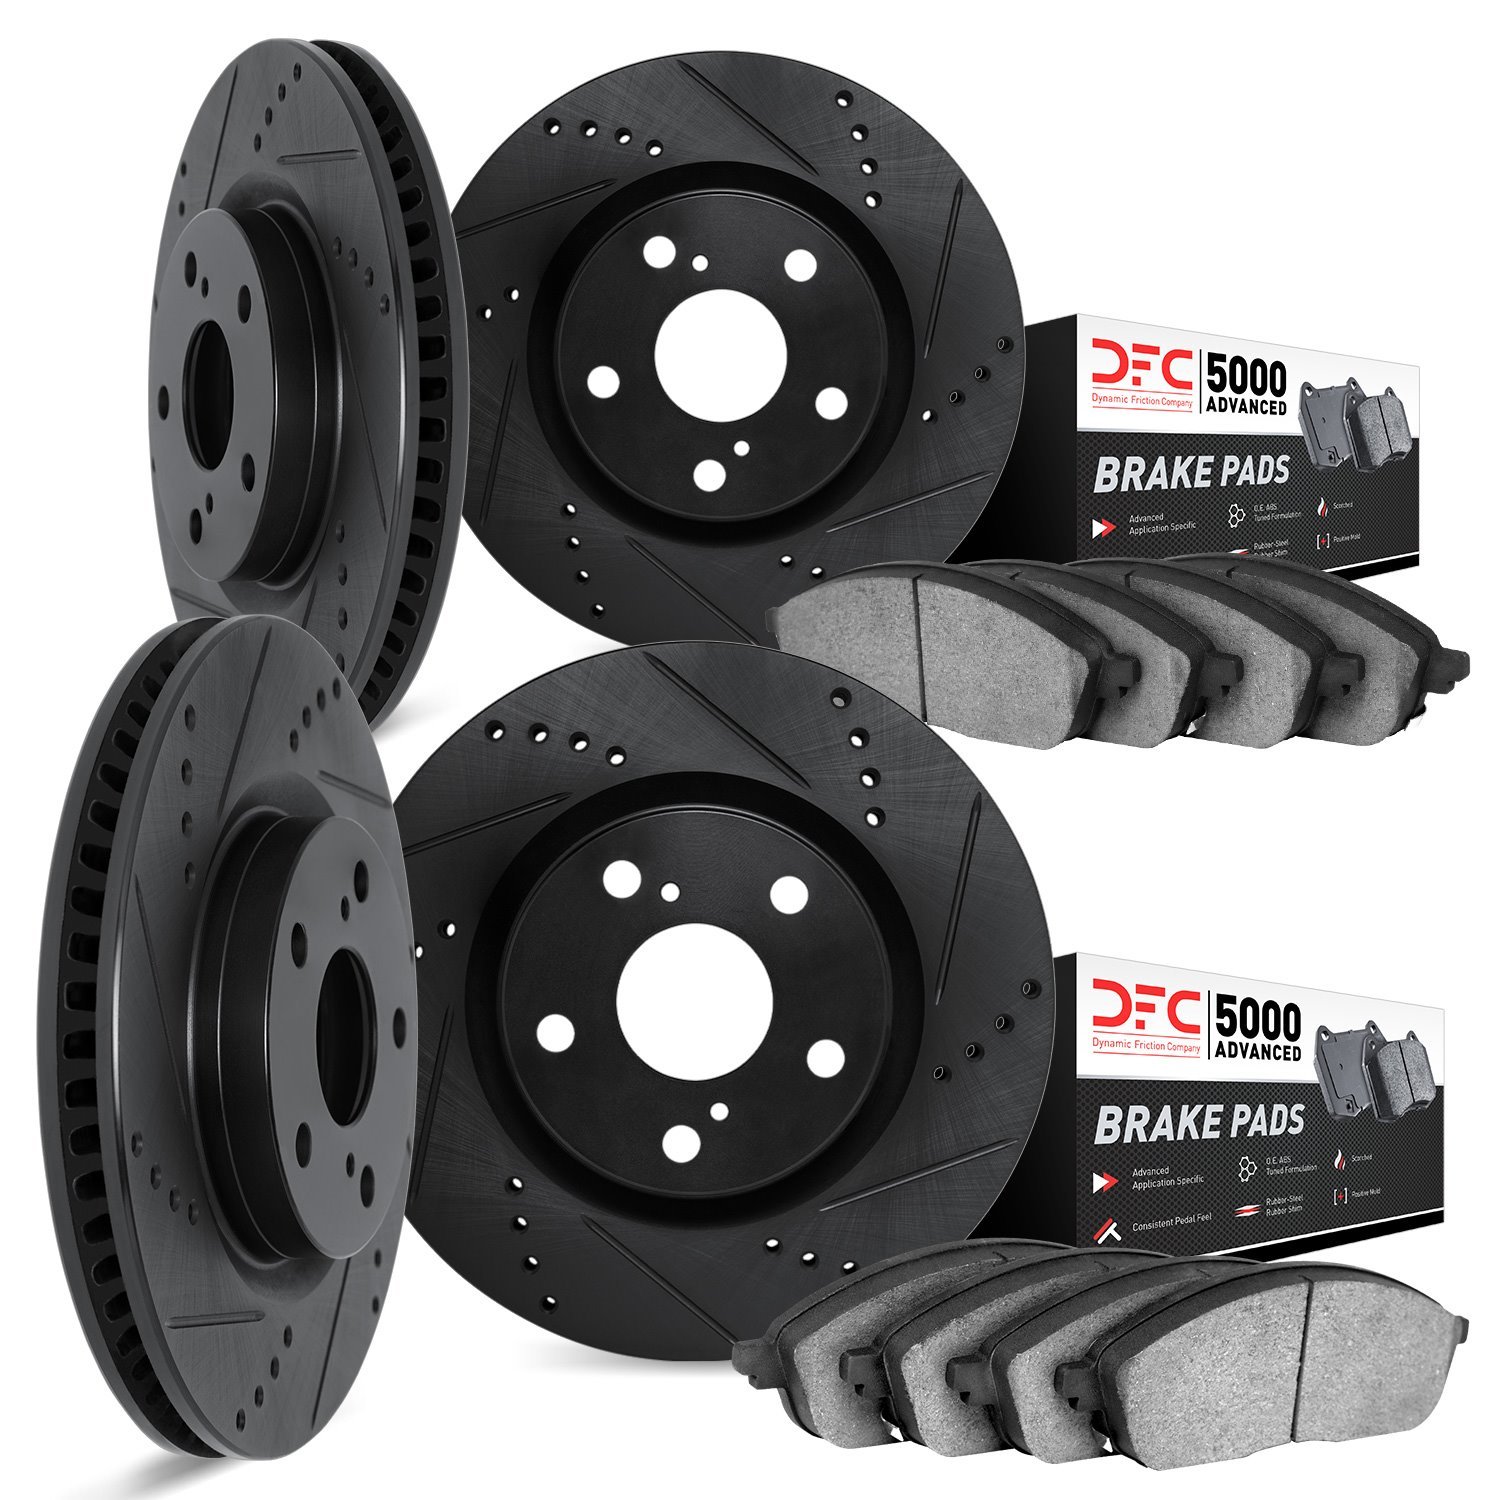 8504-26003 Drilled/Slotted Brake Rotors w/5000 Advanced Brake Pads Kit [Black], Fits Select Tesla, Position: Front and Rear